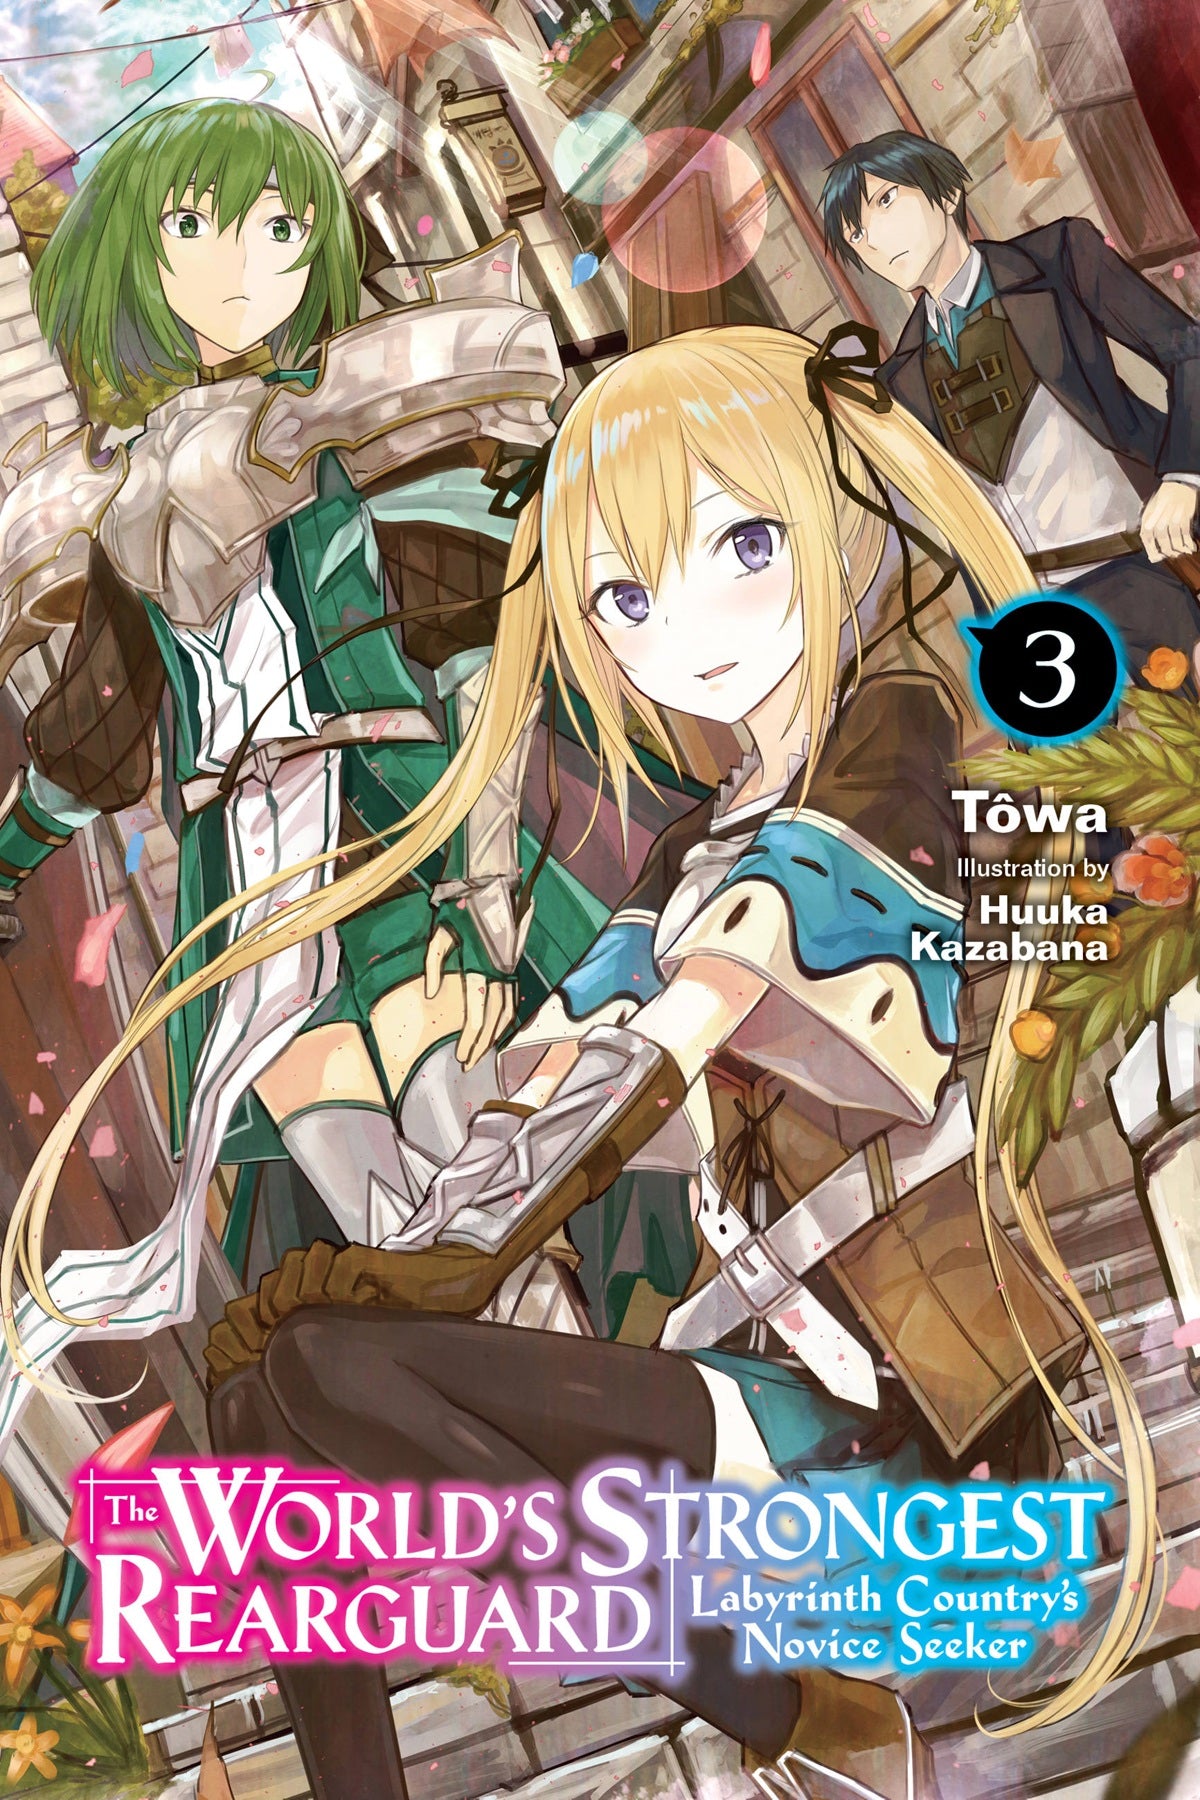 The World's Strongest Rearguard: Labyrinth Country's Novice Seeker Vol. 03 (Light Novel)